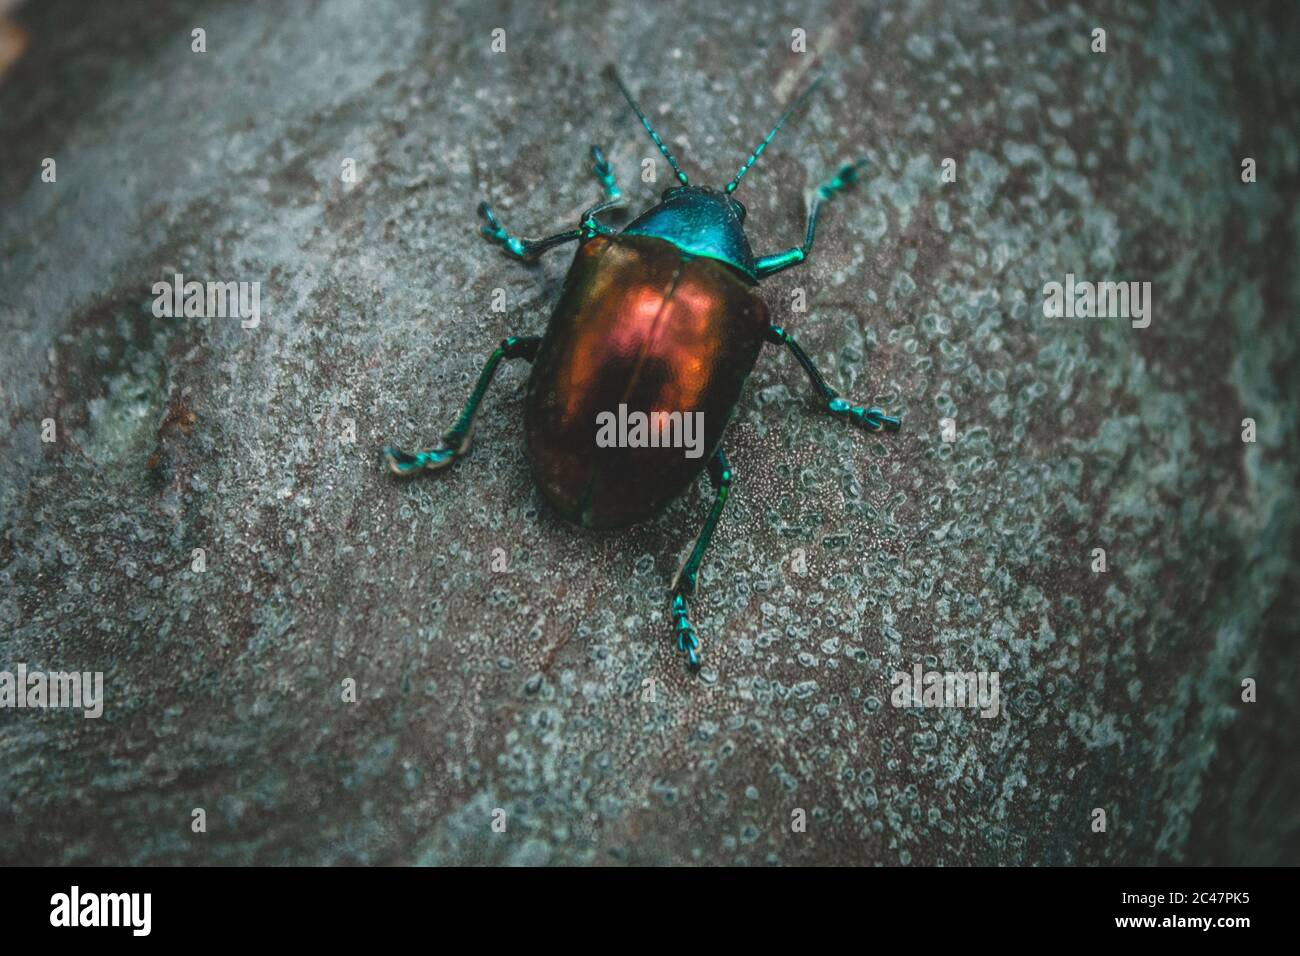 Macro picture of a Japanese beetle on a rock Stock Photo